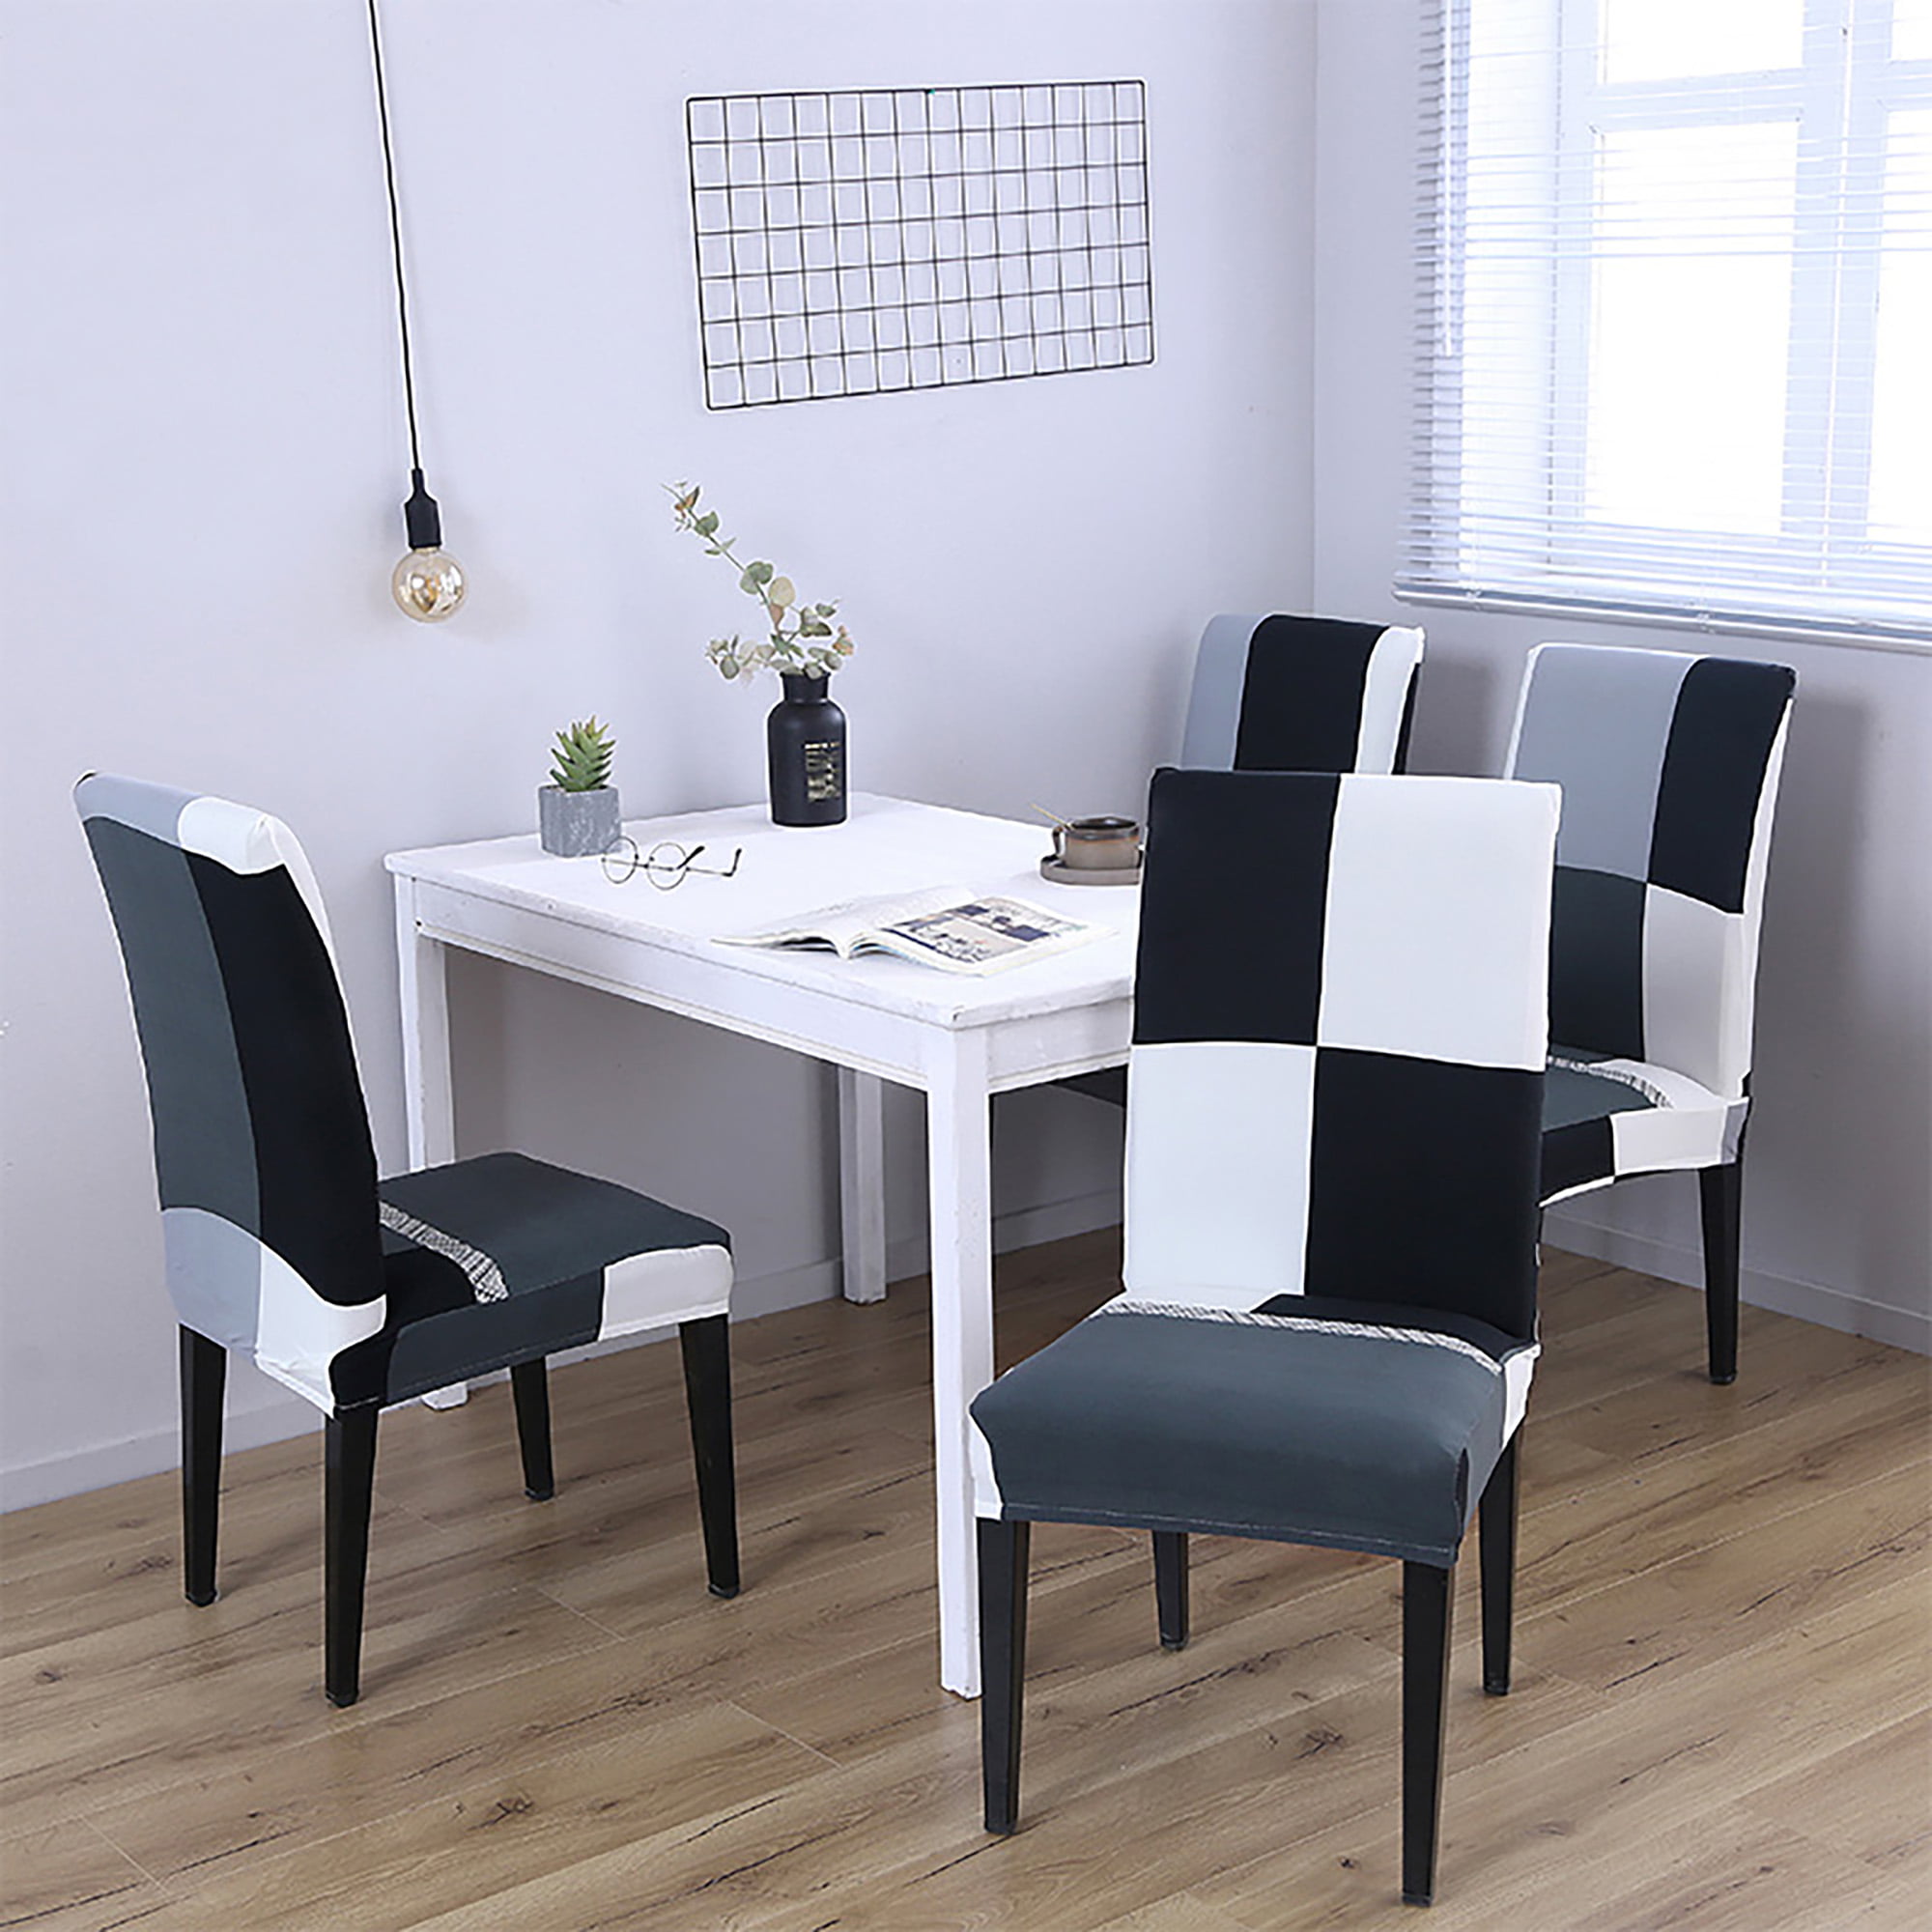 Details about   1/4/6PCS Dining Chair Seat Cover Washable Decor Dining Room Home Slipcover 